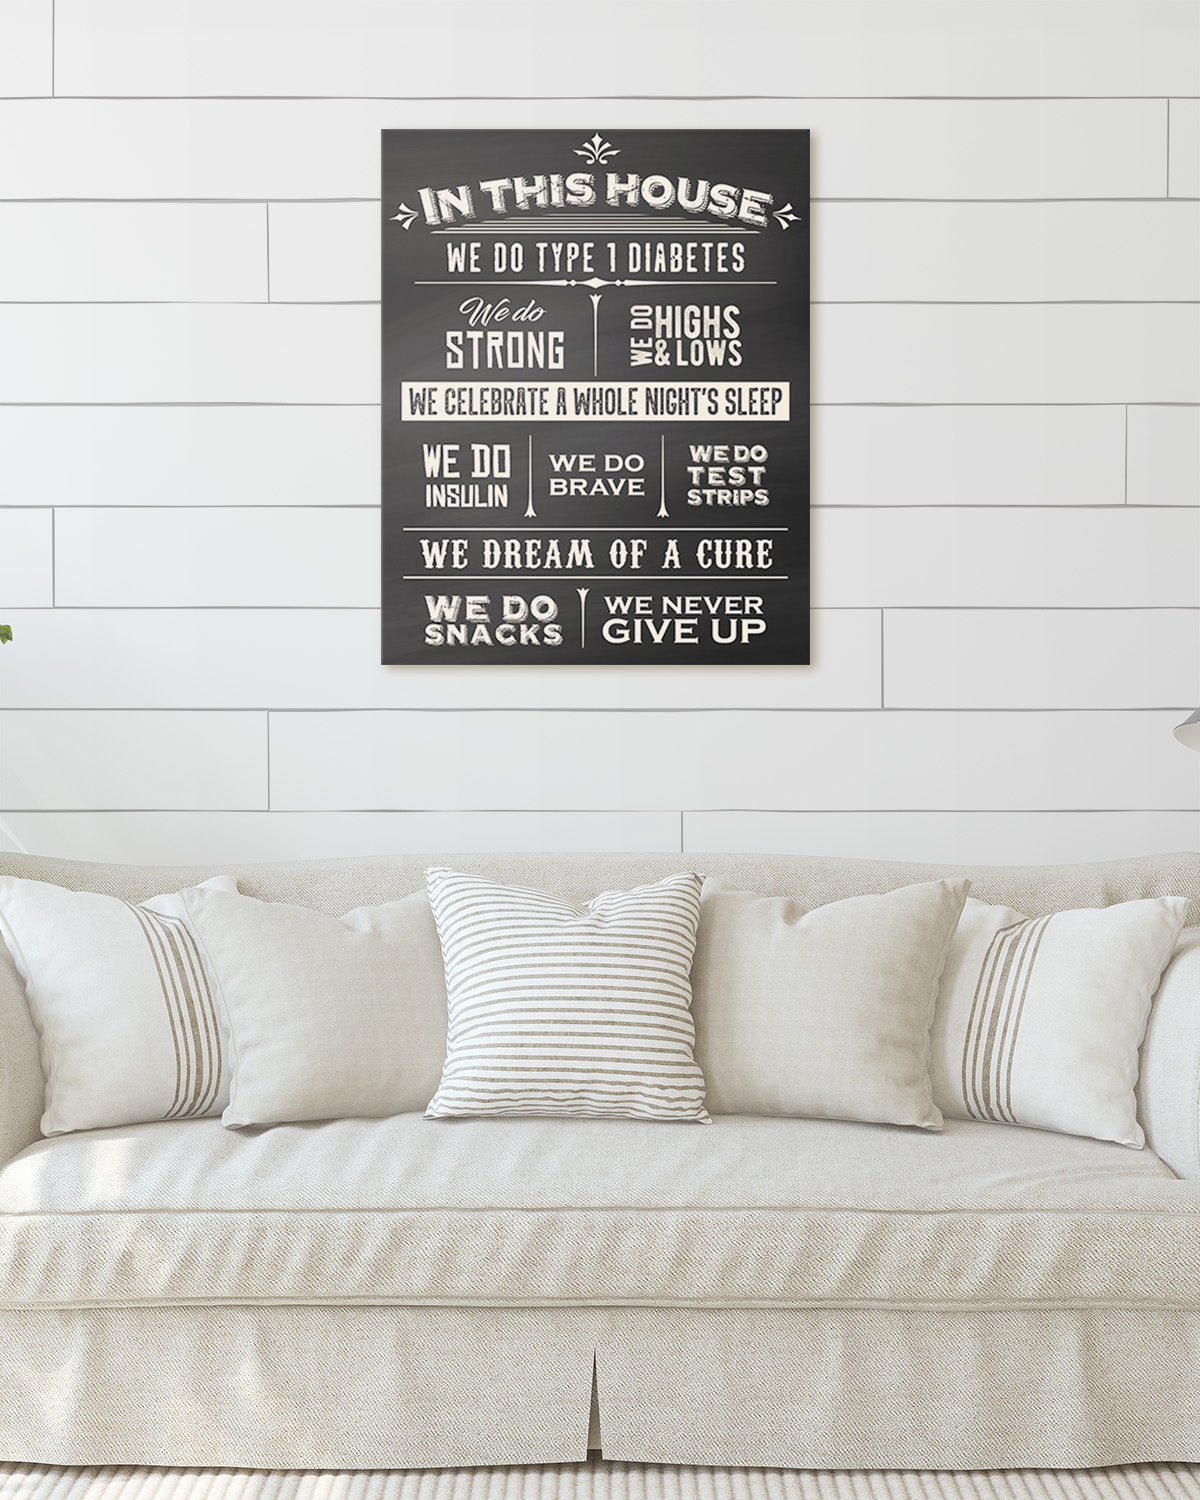 Type One Diabetes Awareness - In This House Wall Art - Diabetes Canvas - Diabetic Wall Decor - Type 1 Diabetes Art - Diabetes Gifts